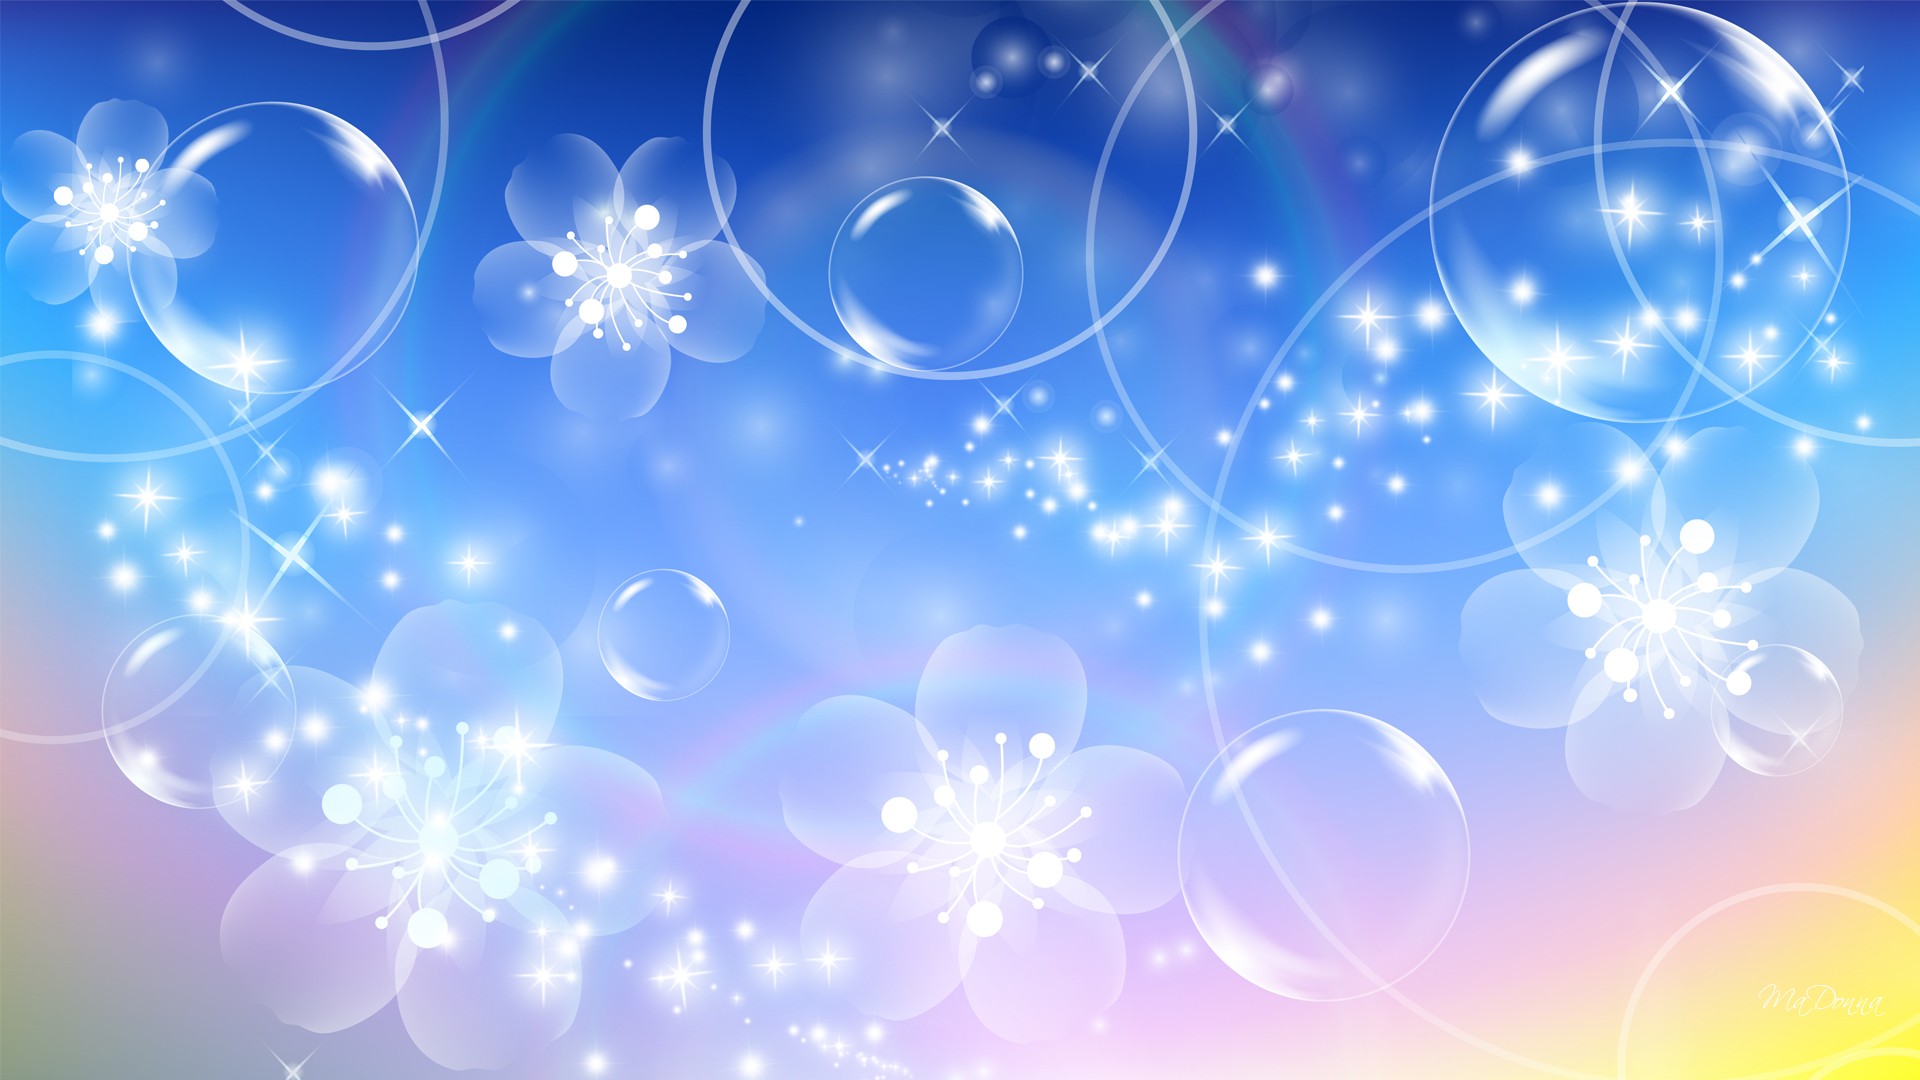 Bubble Background Wallpapers WIN10 THEMES